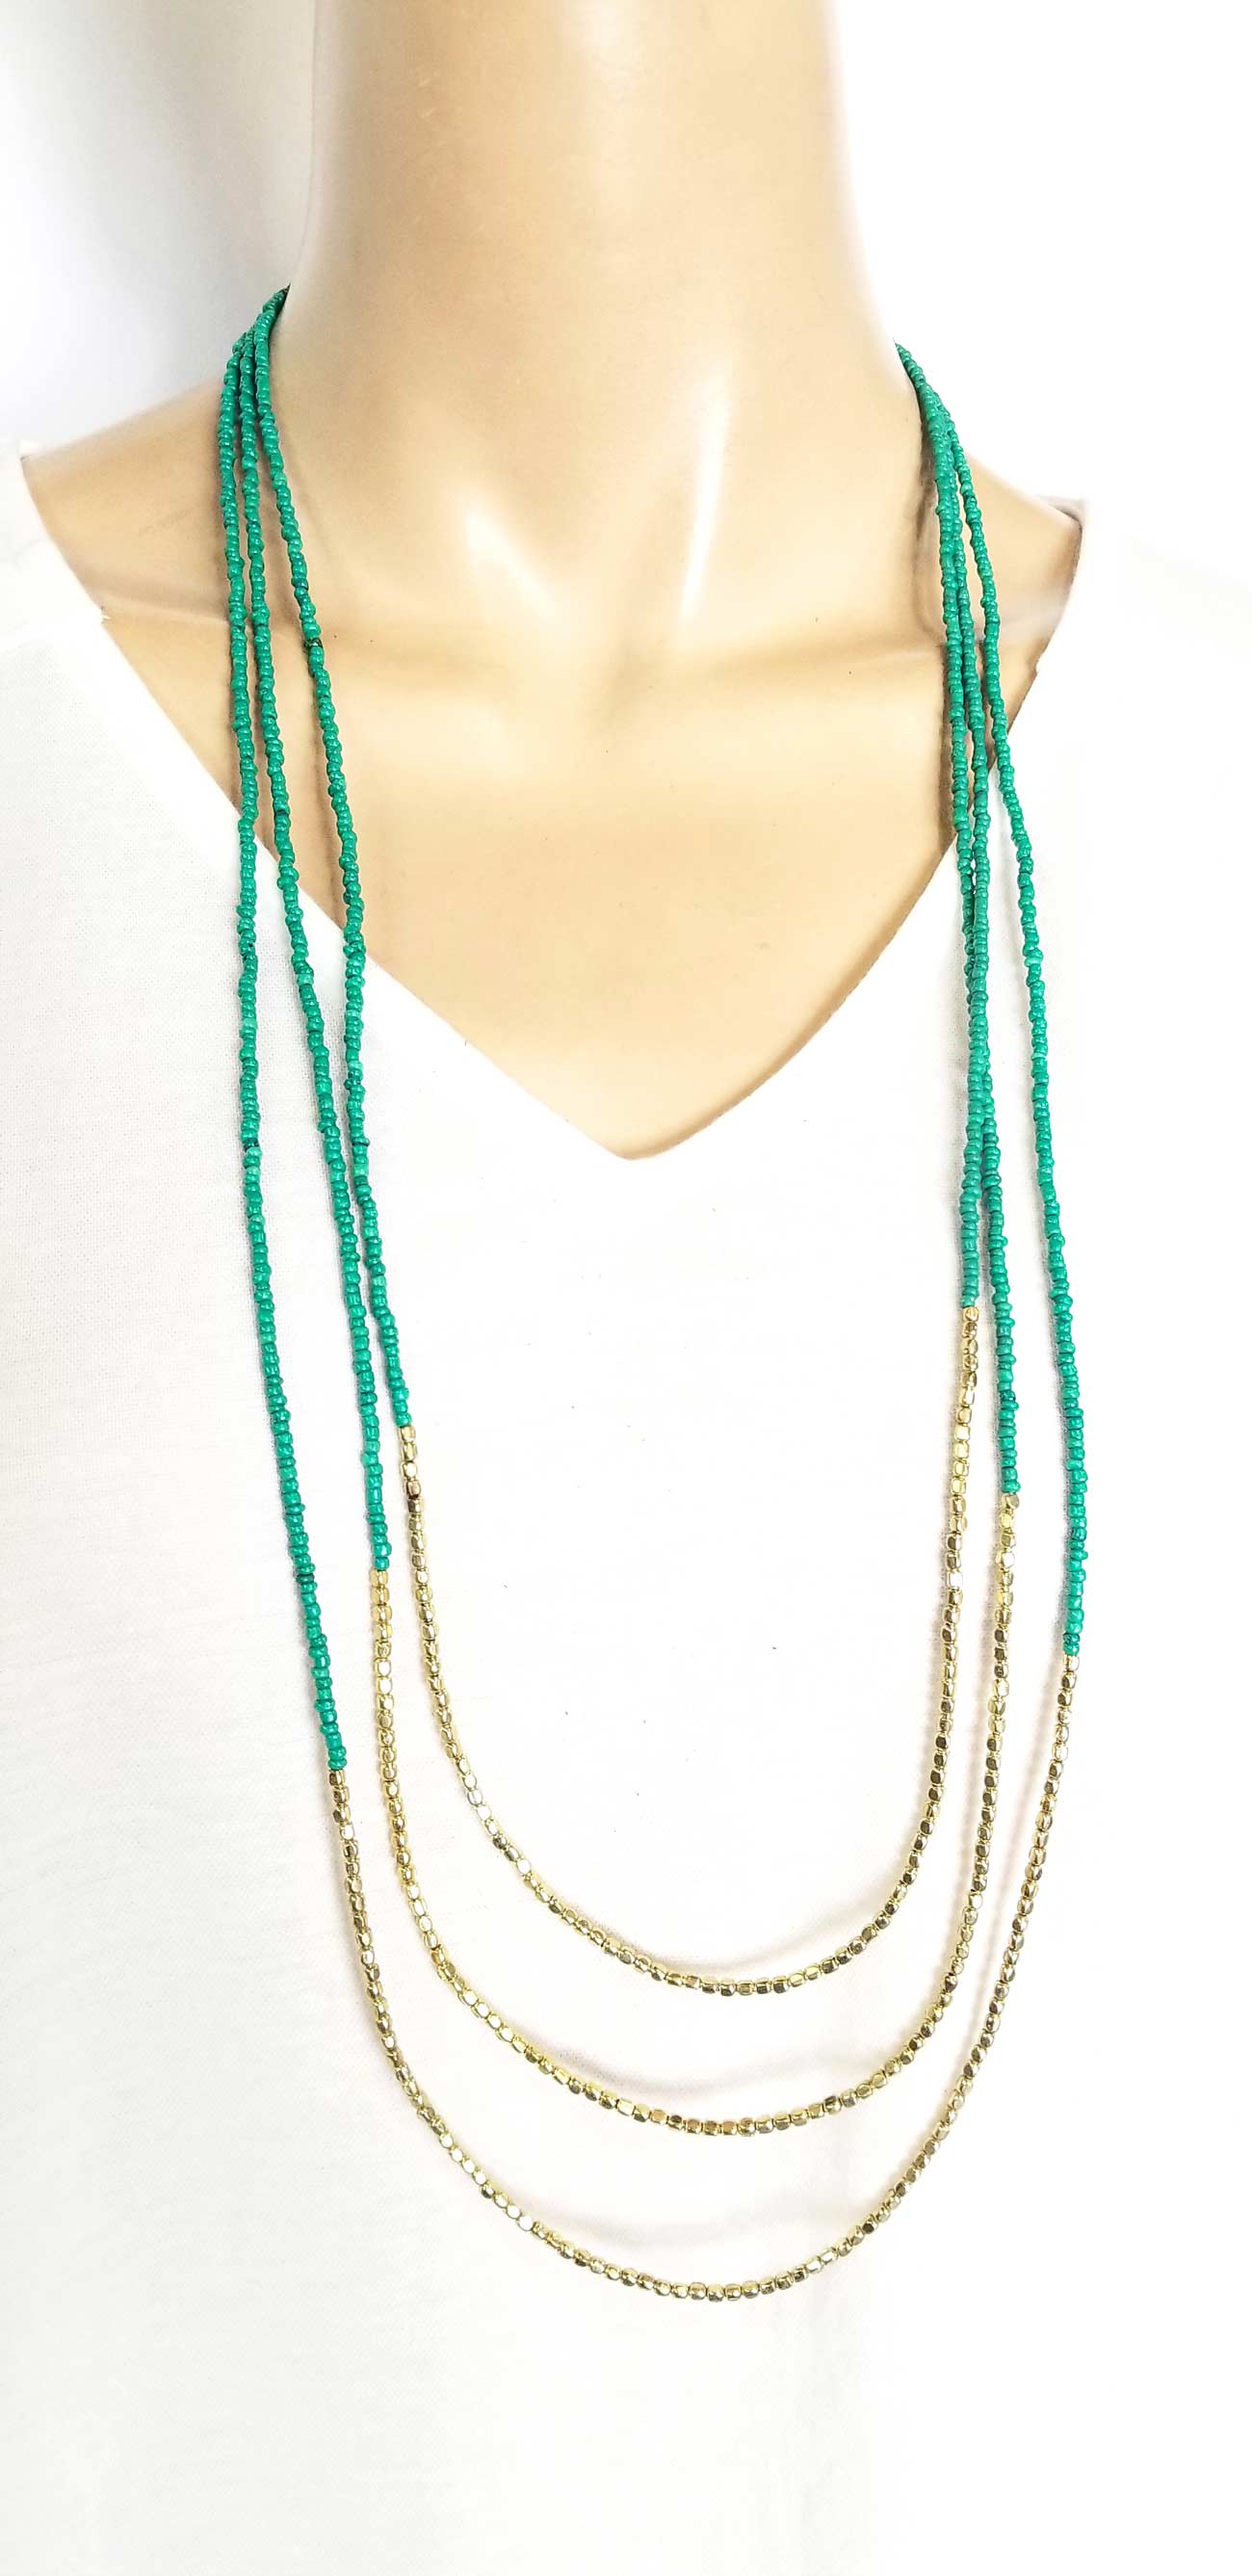 Accessories | Mala | Beaded Necklace Three Layers